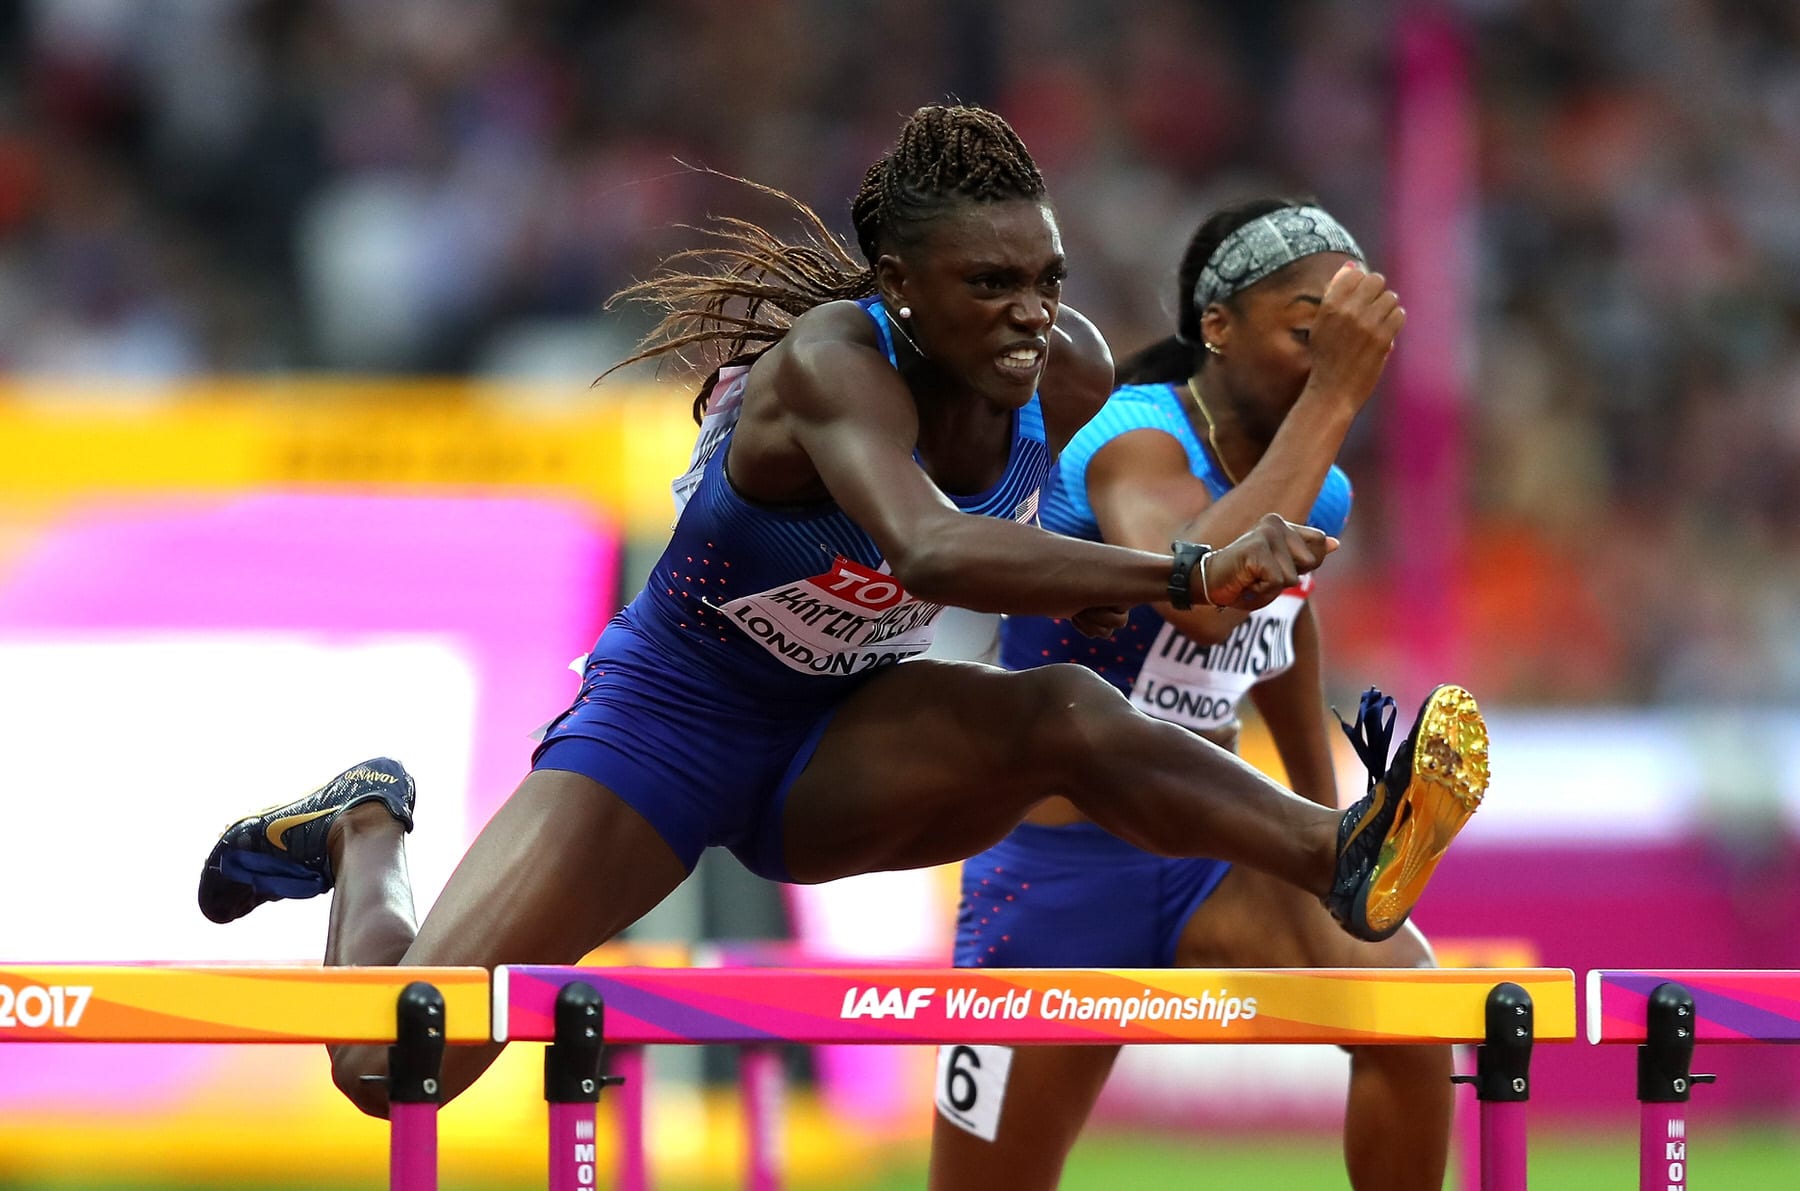 Dawn Harper-Nelson jumping over a hurdle.